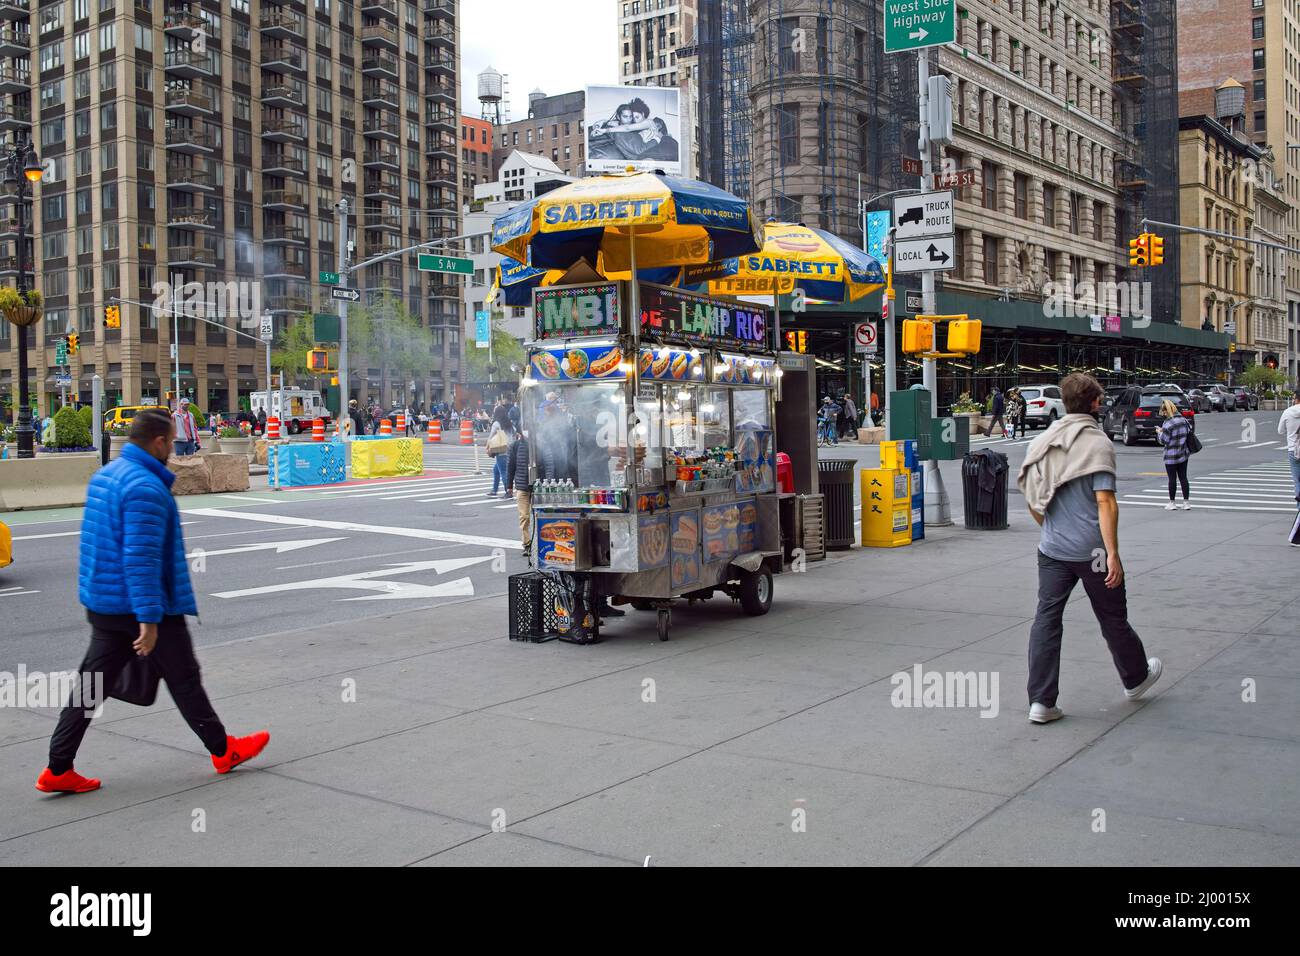 New York, NY, USA - Mar 15, 2022: Vendor near Flatiron Building with steam coming from cart as meat products are kept hot Stock Photo